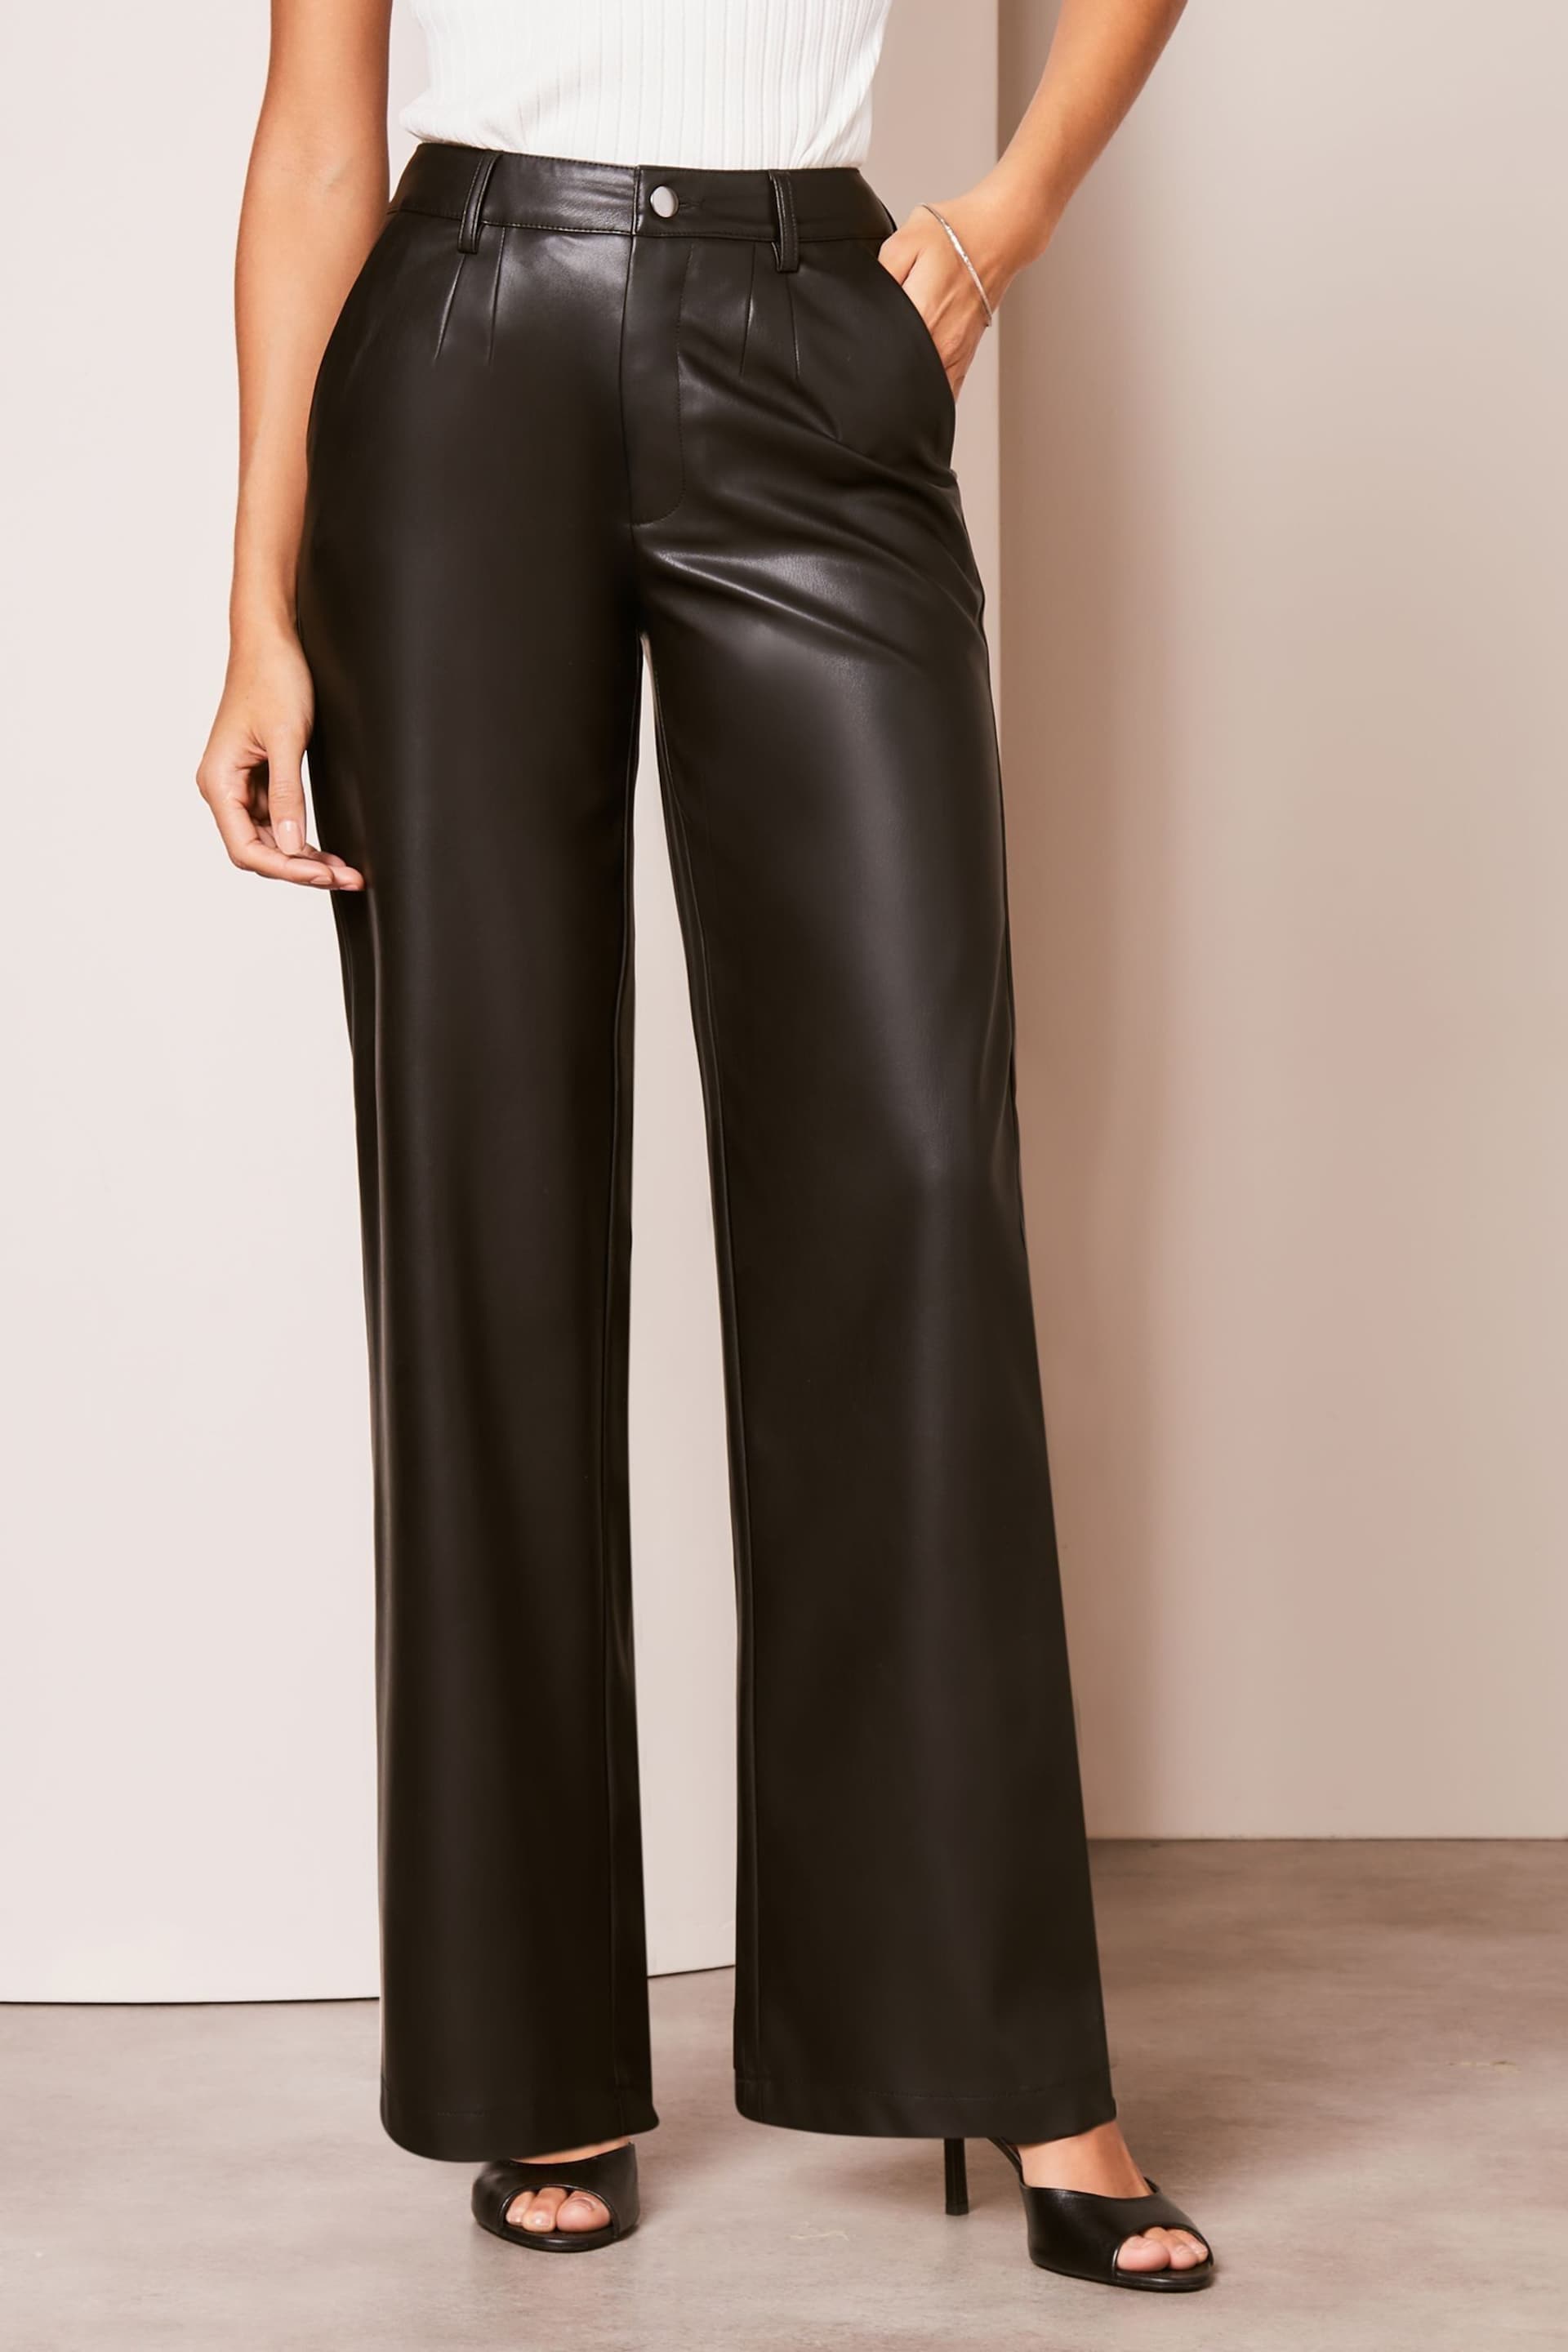 Lipsy Black Faux Leather Wide Leg Trousers - Image 1 of 4